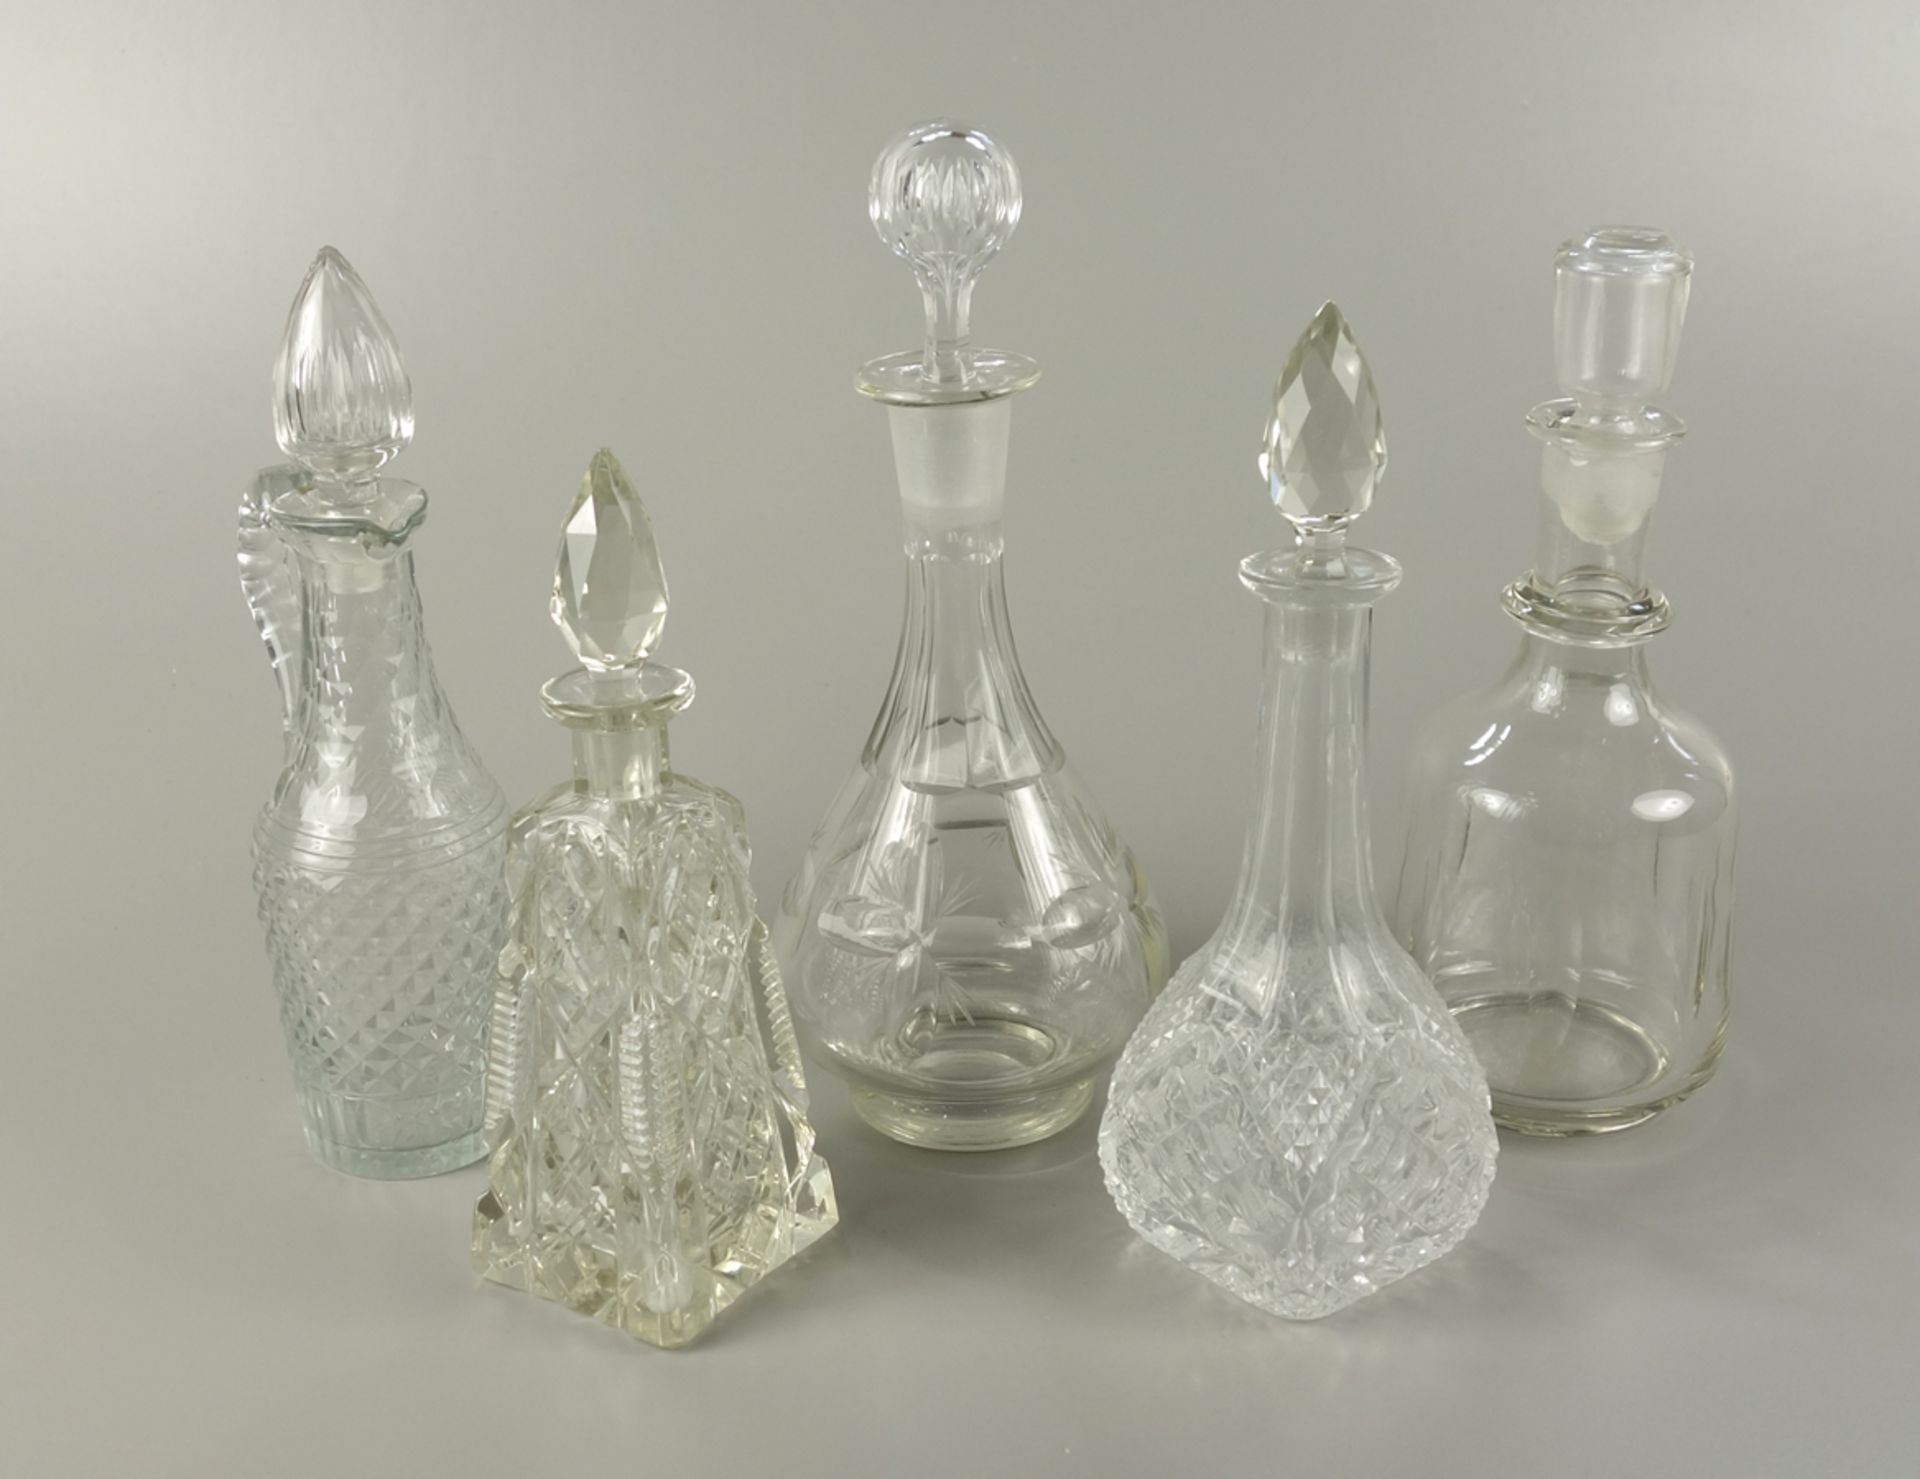 5 small carafes, glass and crystal, 20th c.